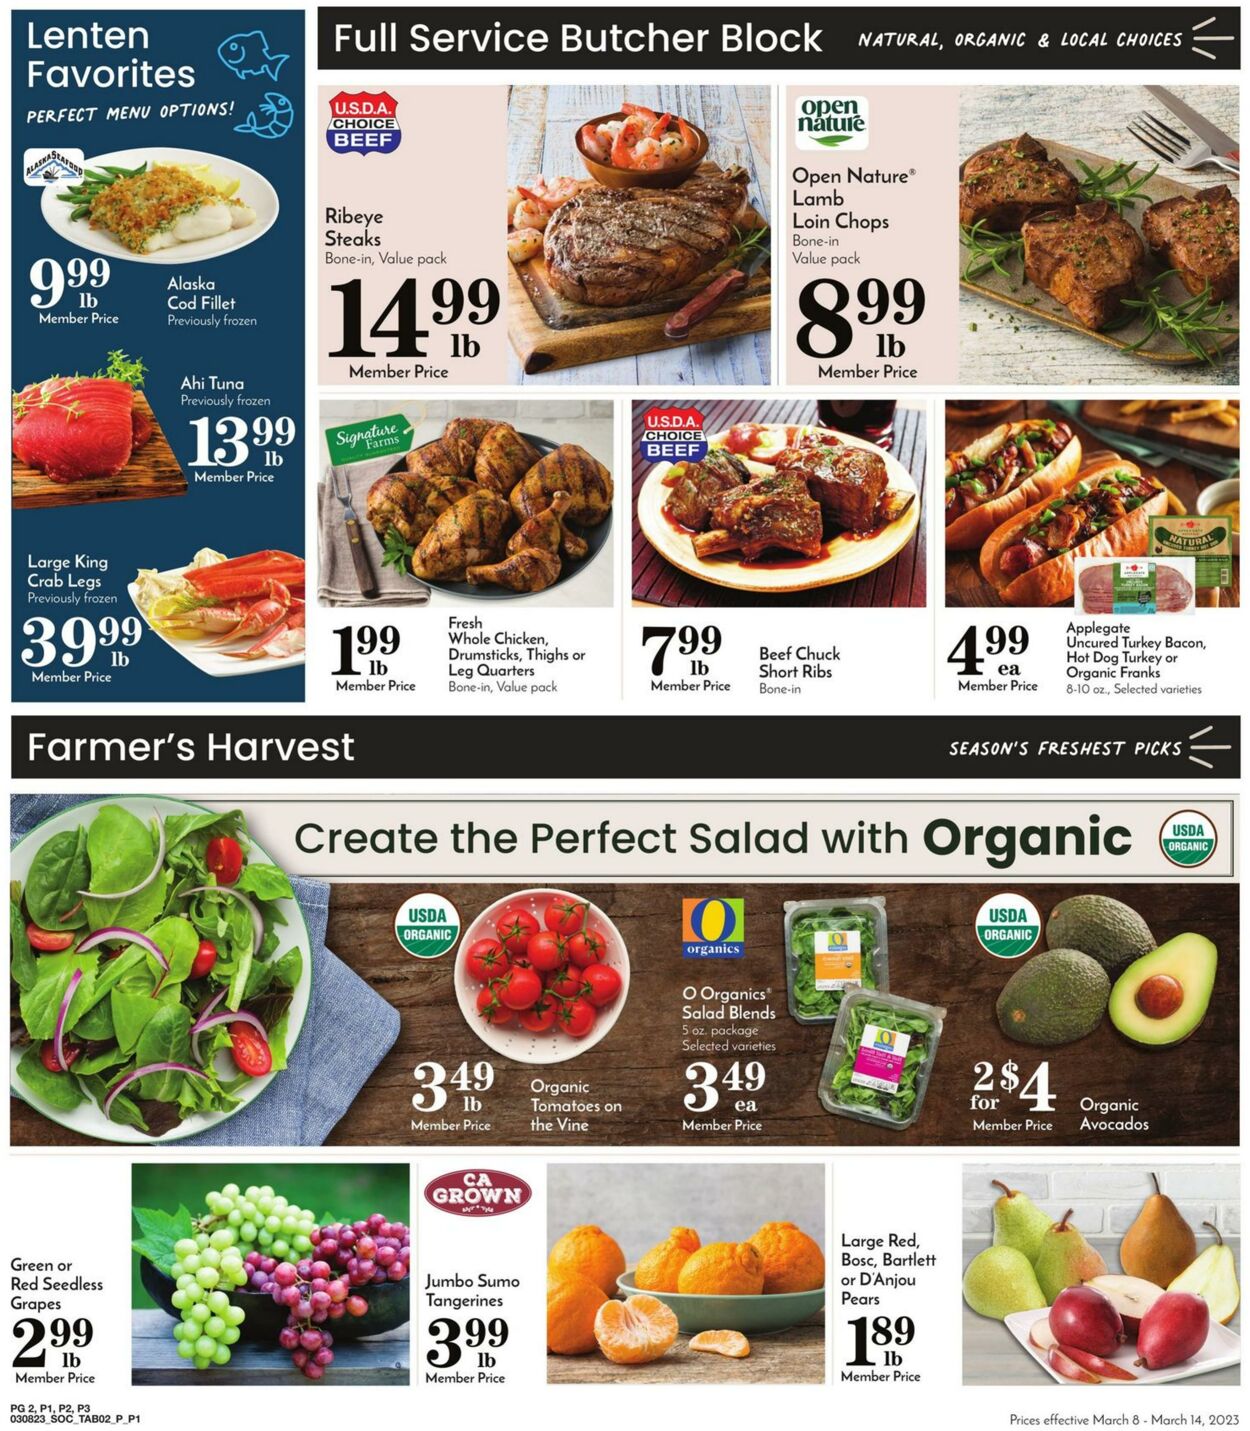 Weekly ad Pavilions 03/08/2023 - 03/14/2023